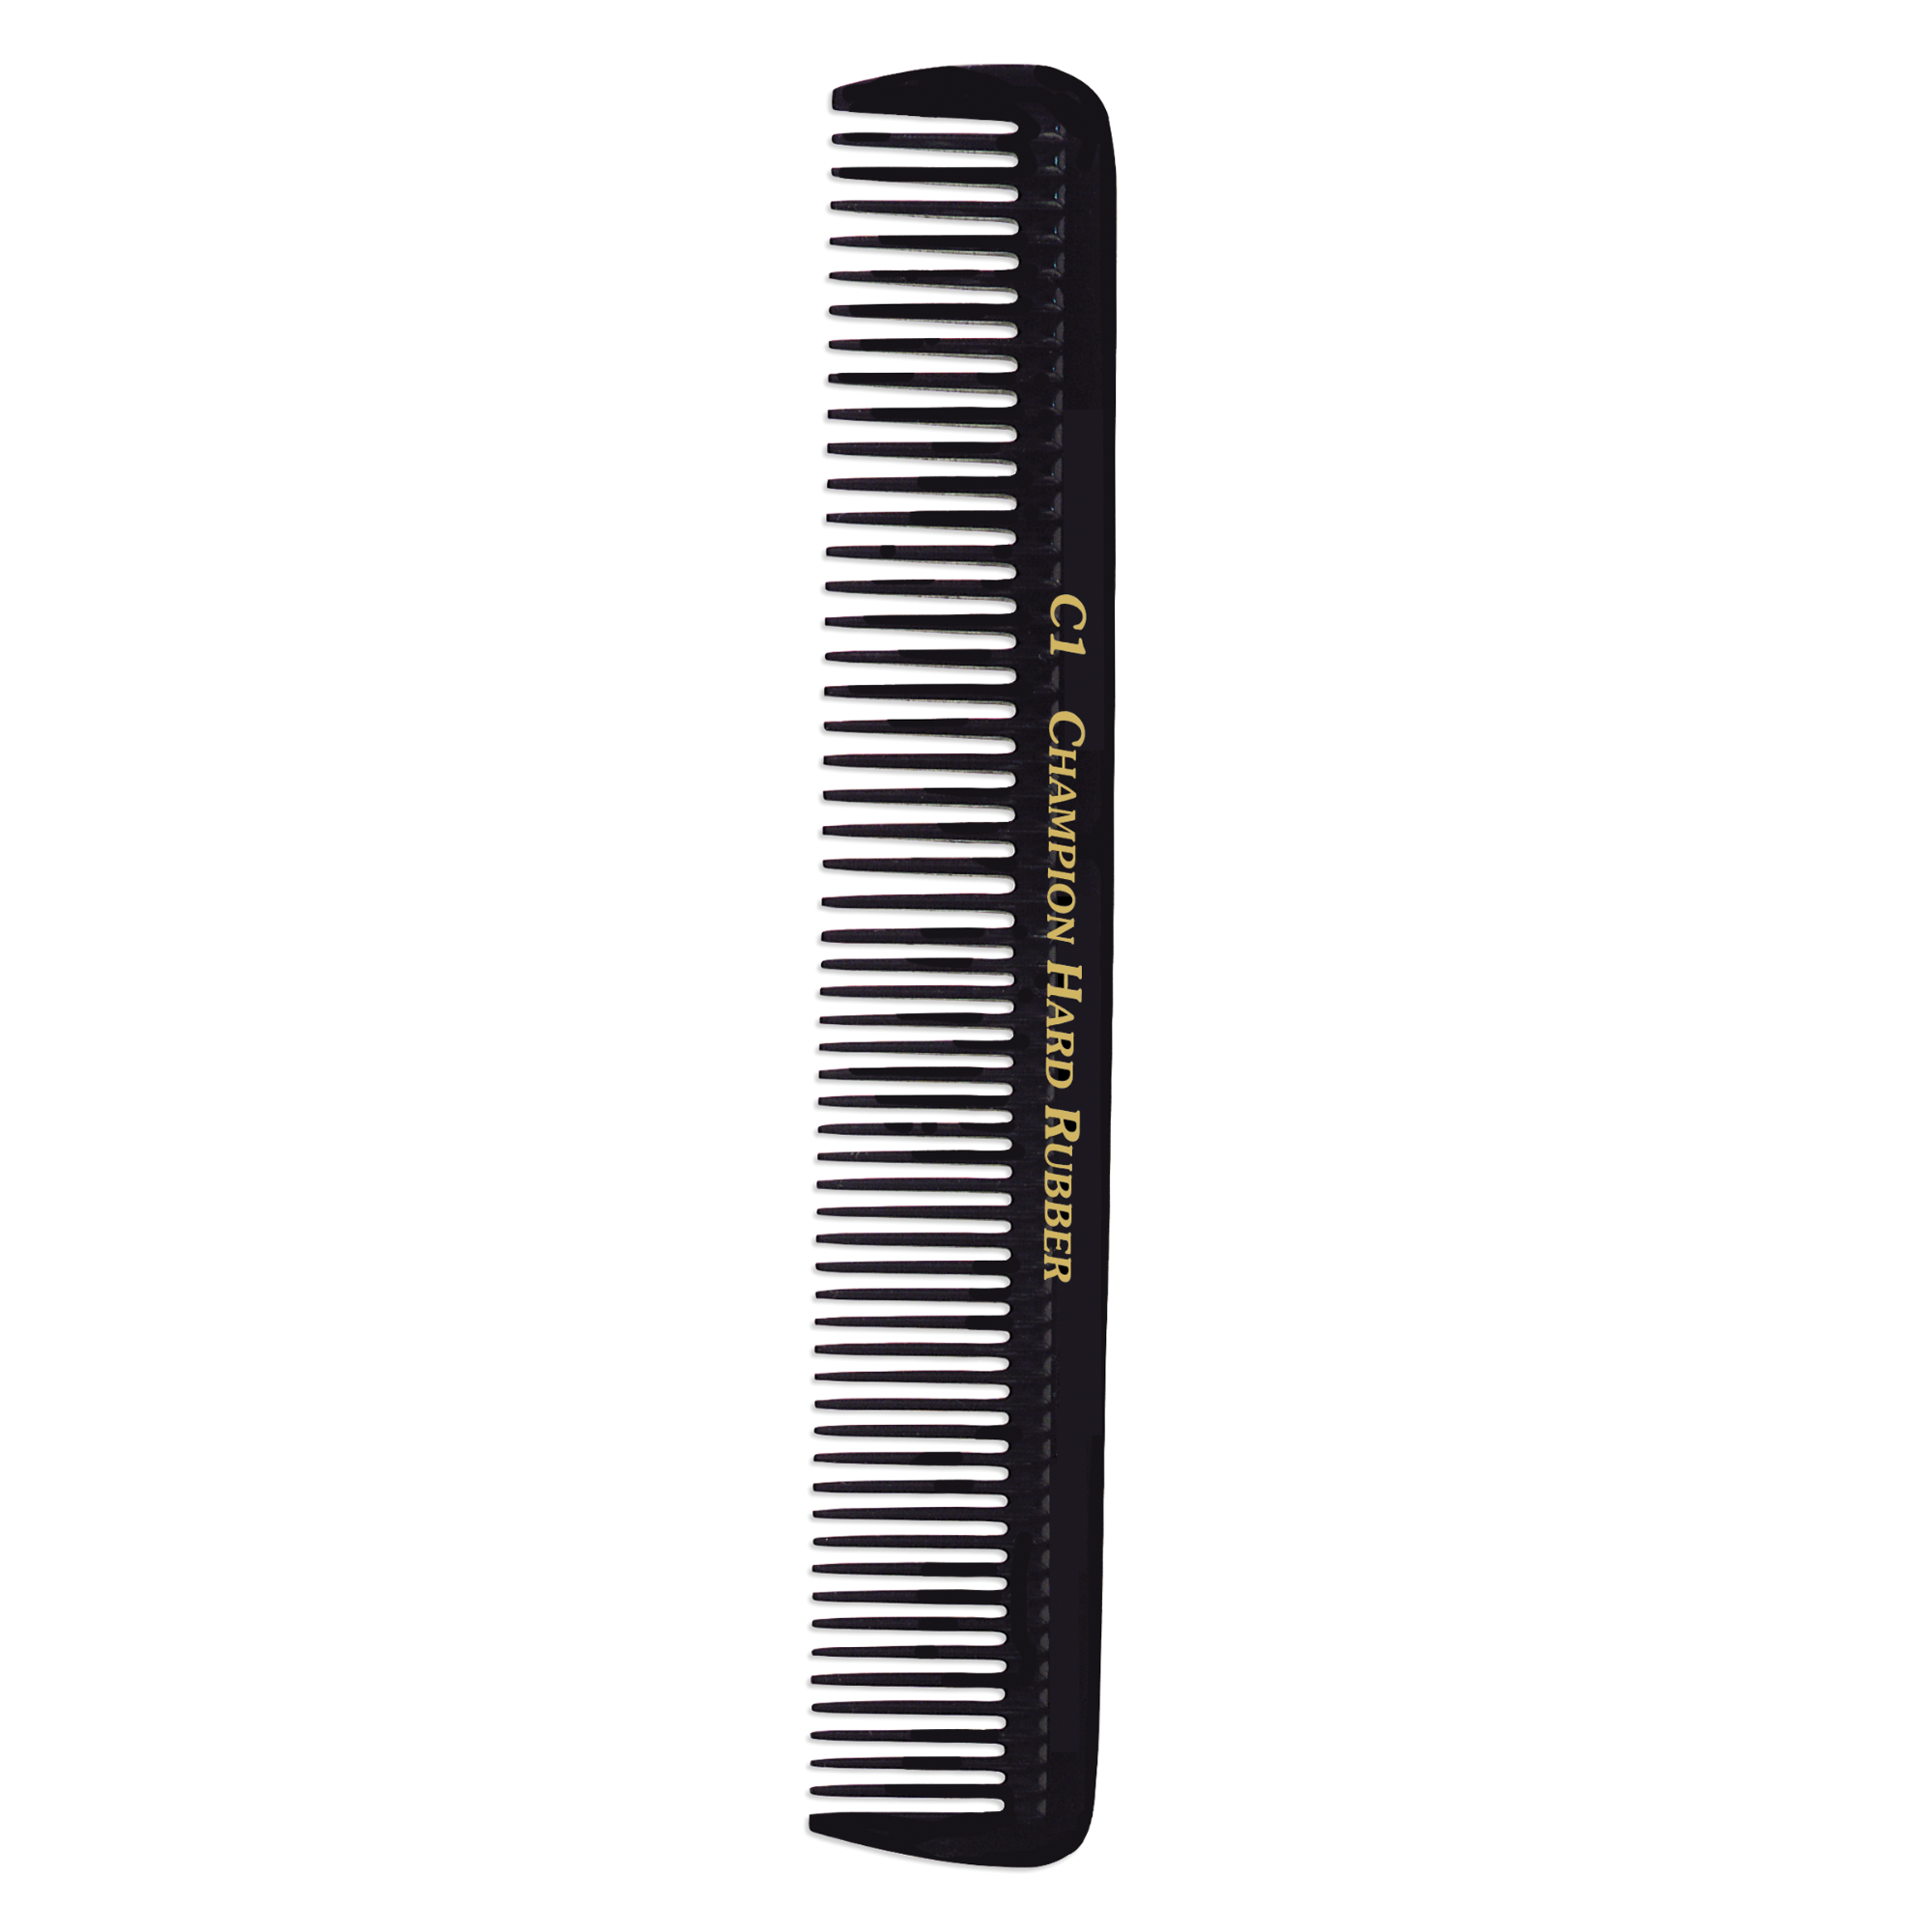 Hard Rubber Styling Comb - 7-1/2"